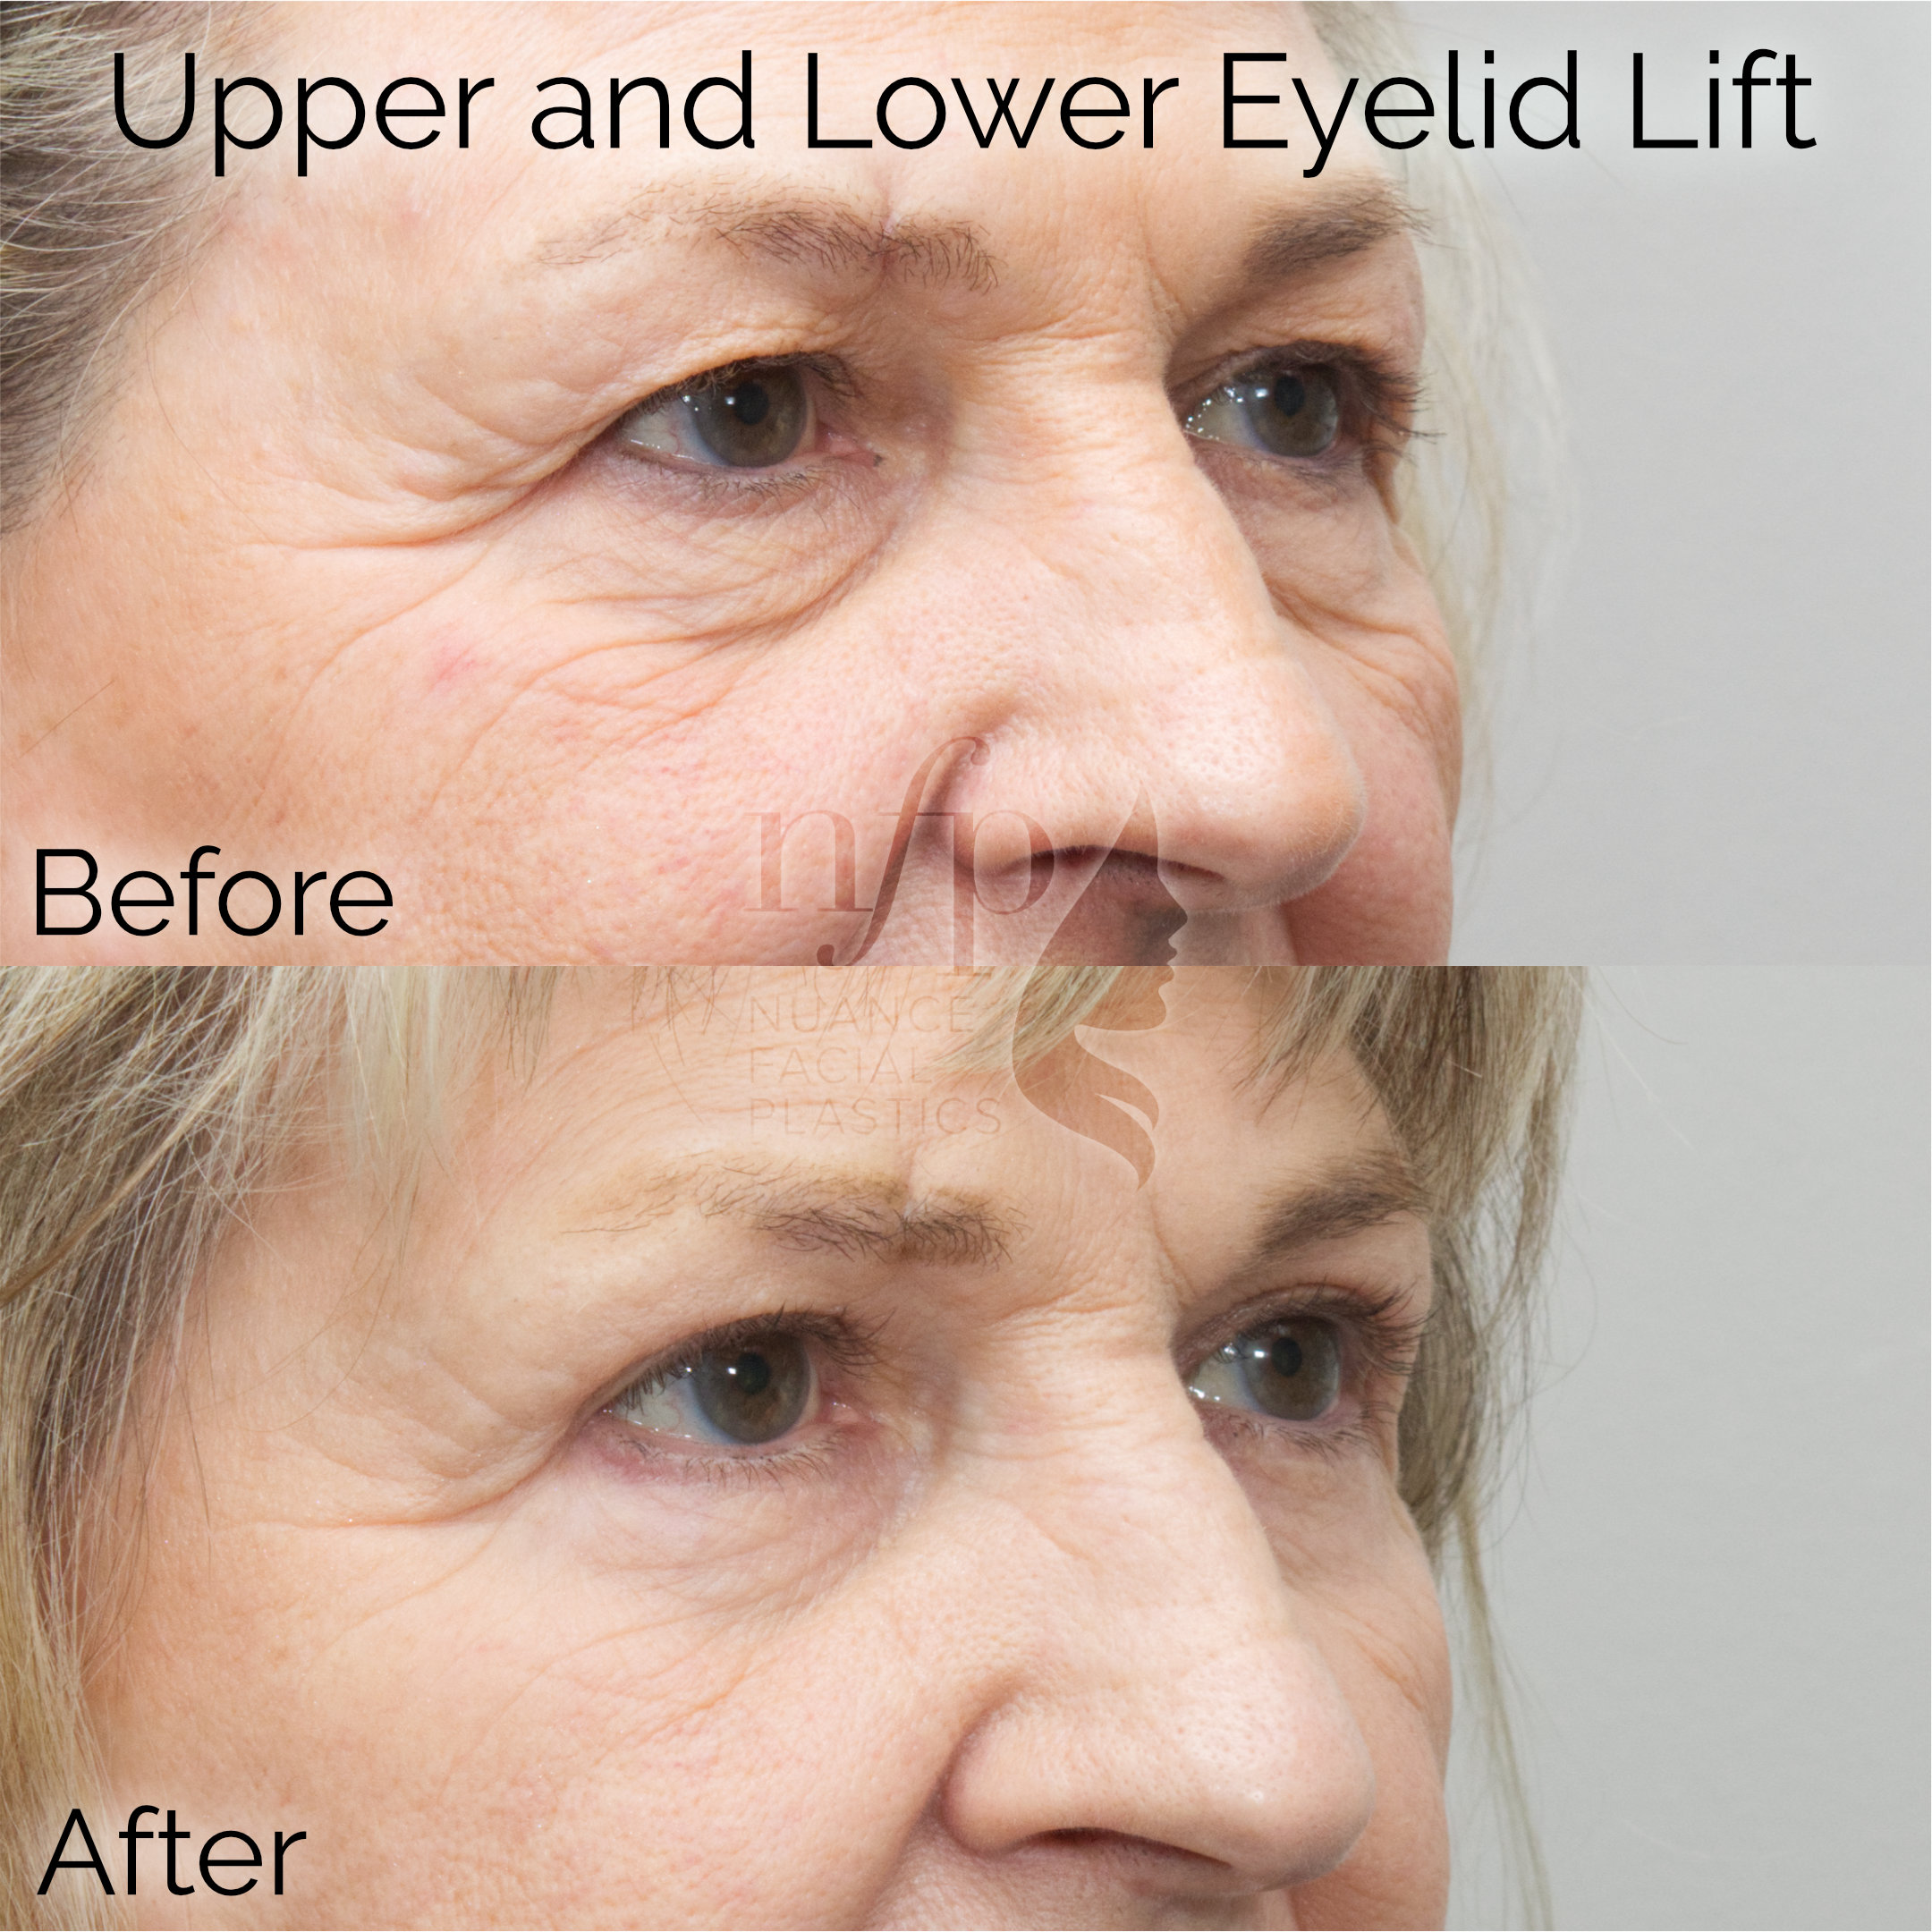 Right Oblique View of Upper and Lower Eyelid Lift